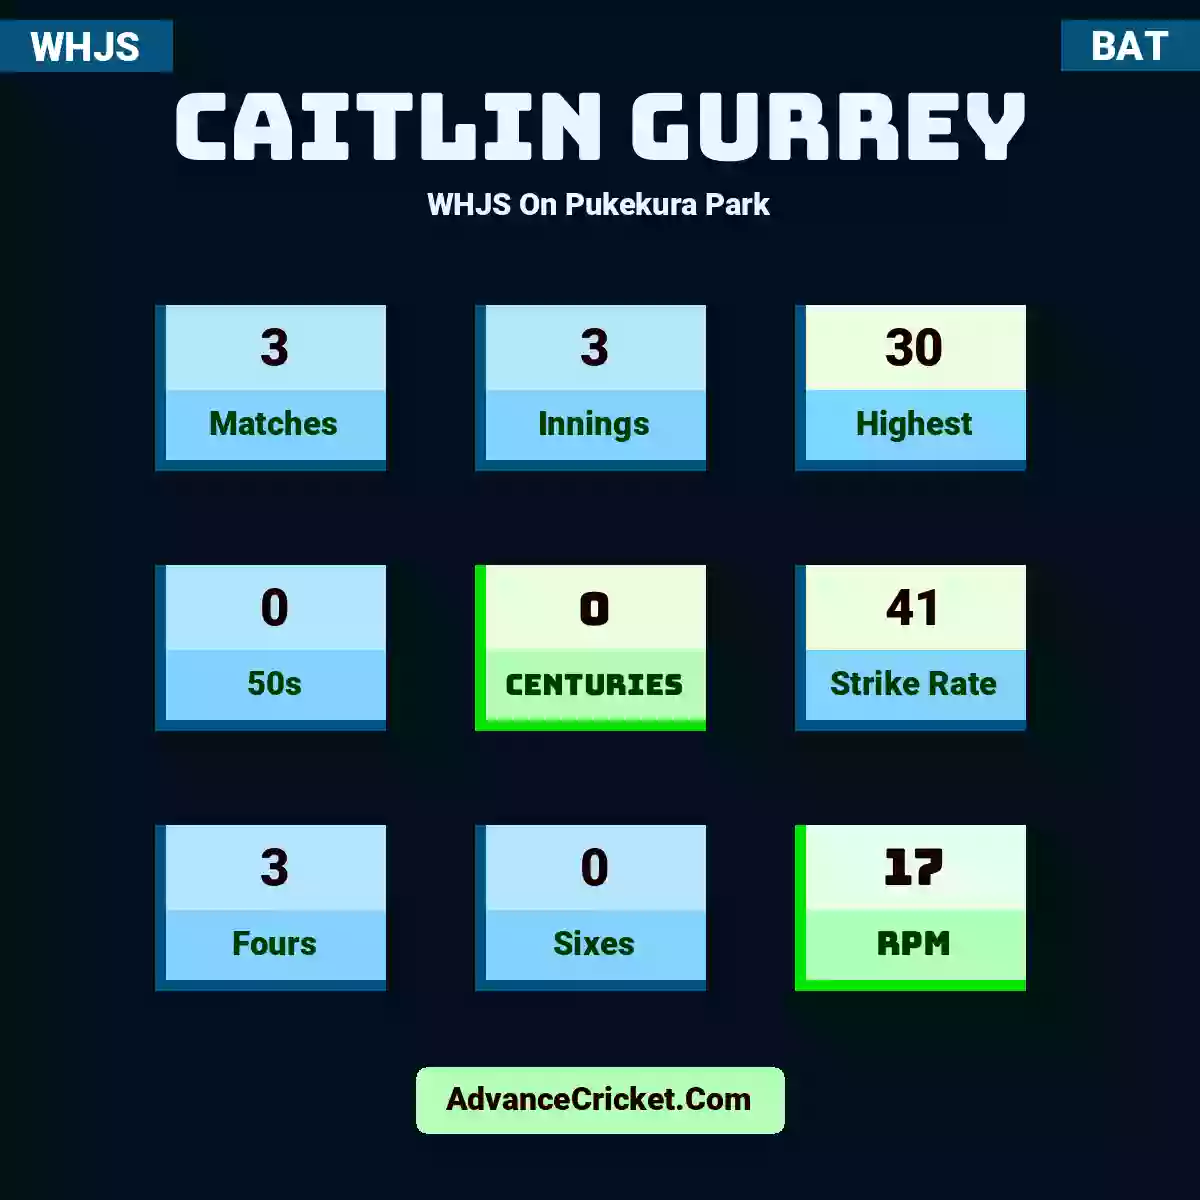 Caitlin Gurrey WHJS  On Pukekura Park, Caitlin Gurrey played 3 matches, scored 30 runs as highest, 0 half-centuries, and 0 centuries, with a strike rate of 41. C.Gurrey hit 3 fours and 0 sixes, with an RPM of 17.